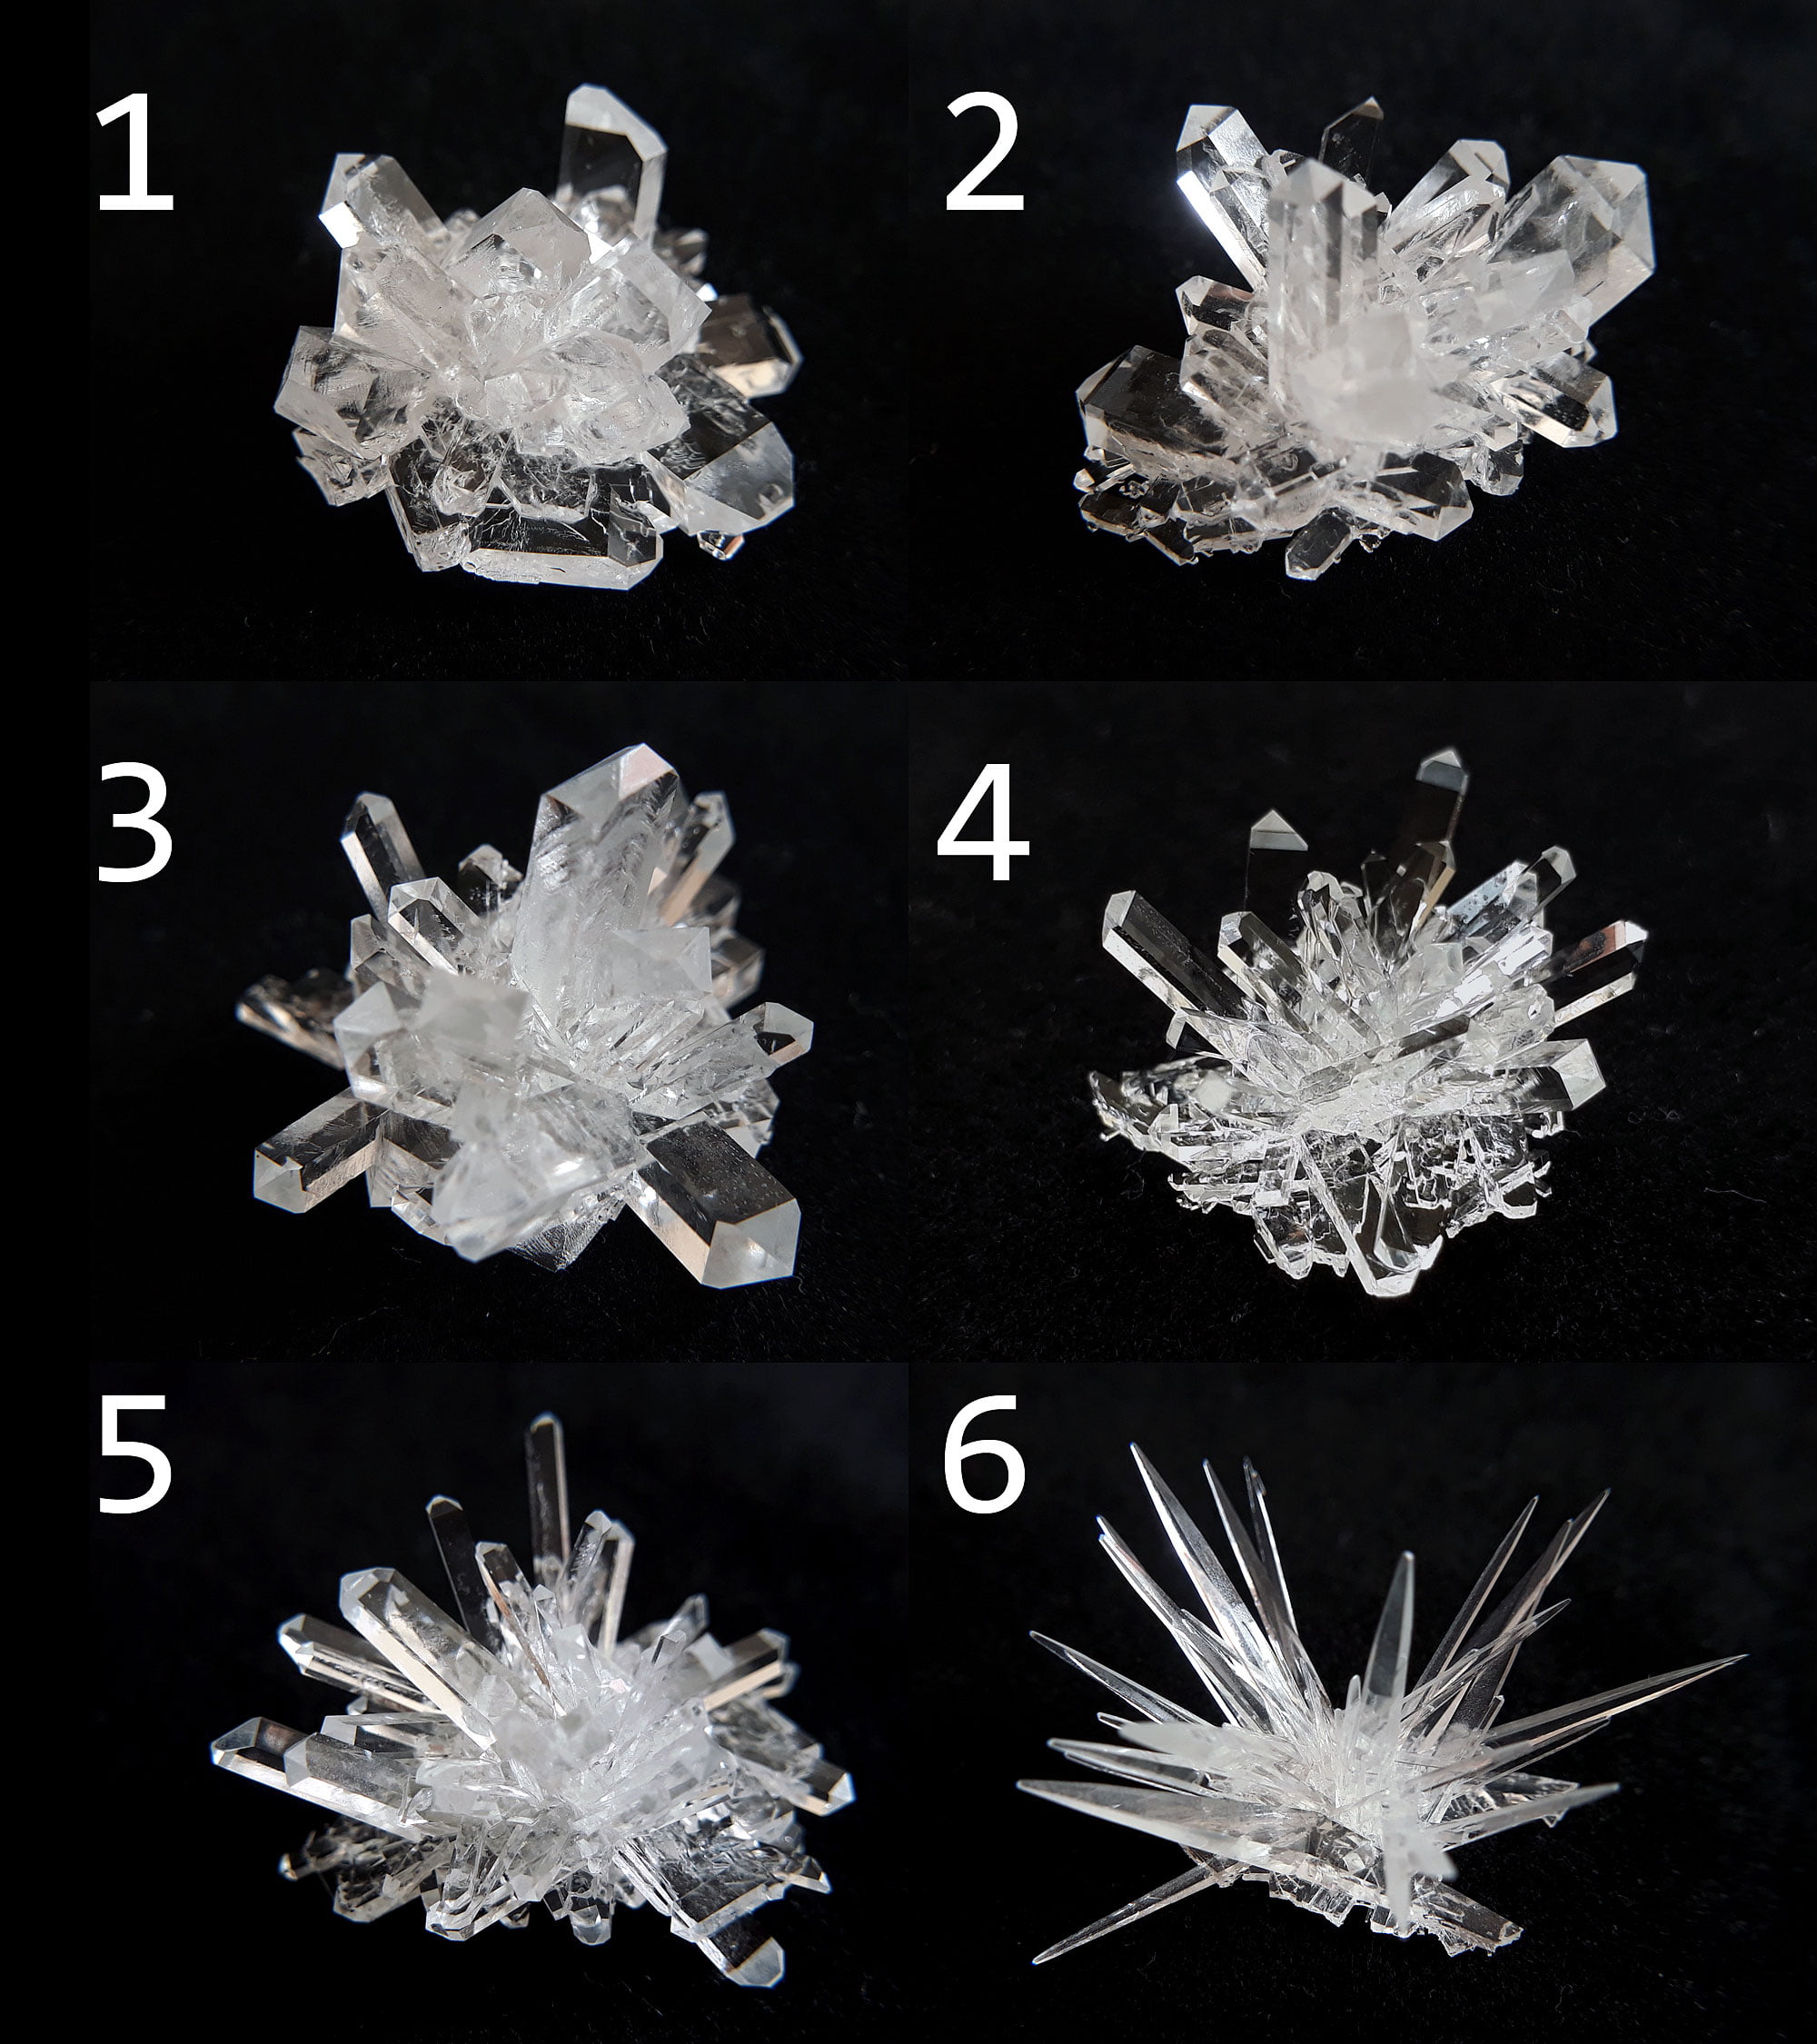 growing crystals research